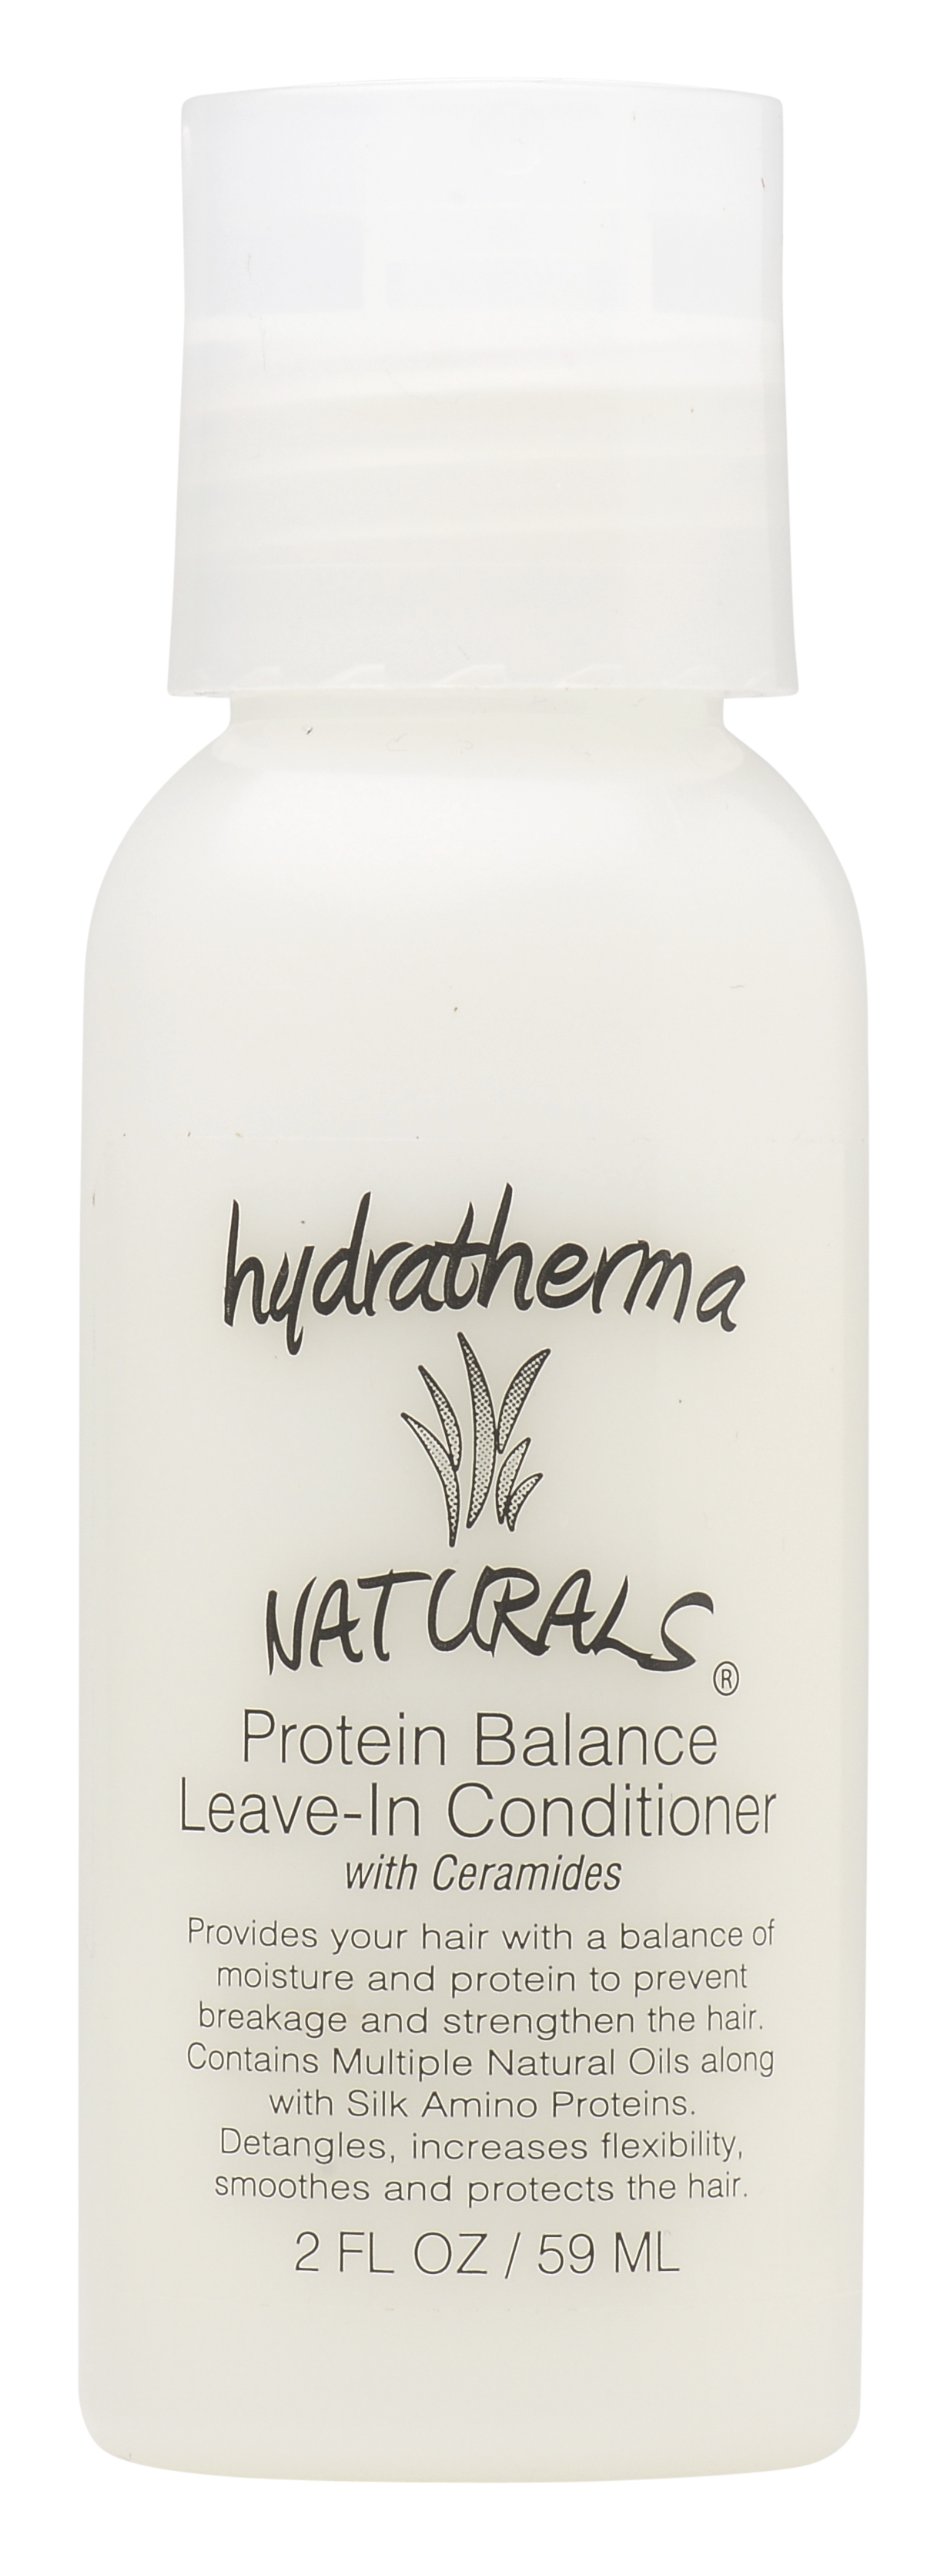 Hydratherma Naturals Protein Balance Leave In Conditioner 2 oz.